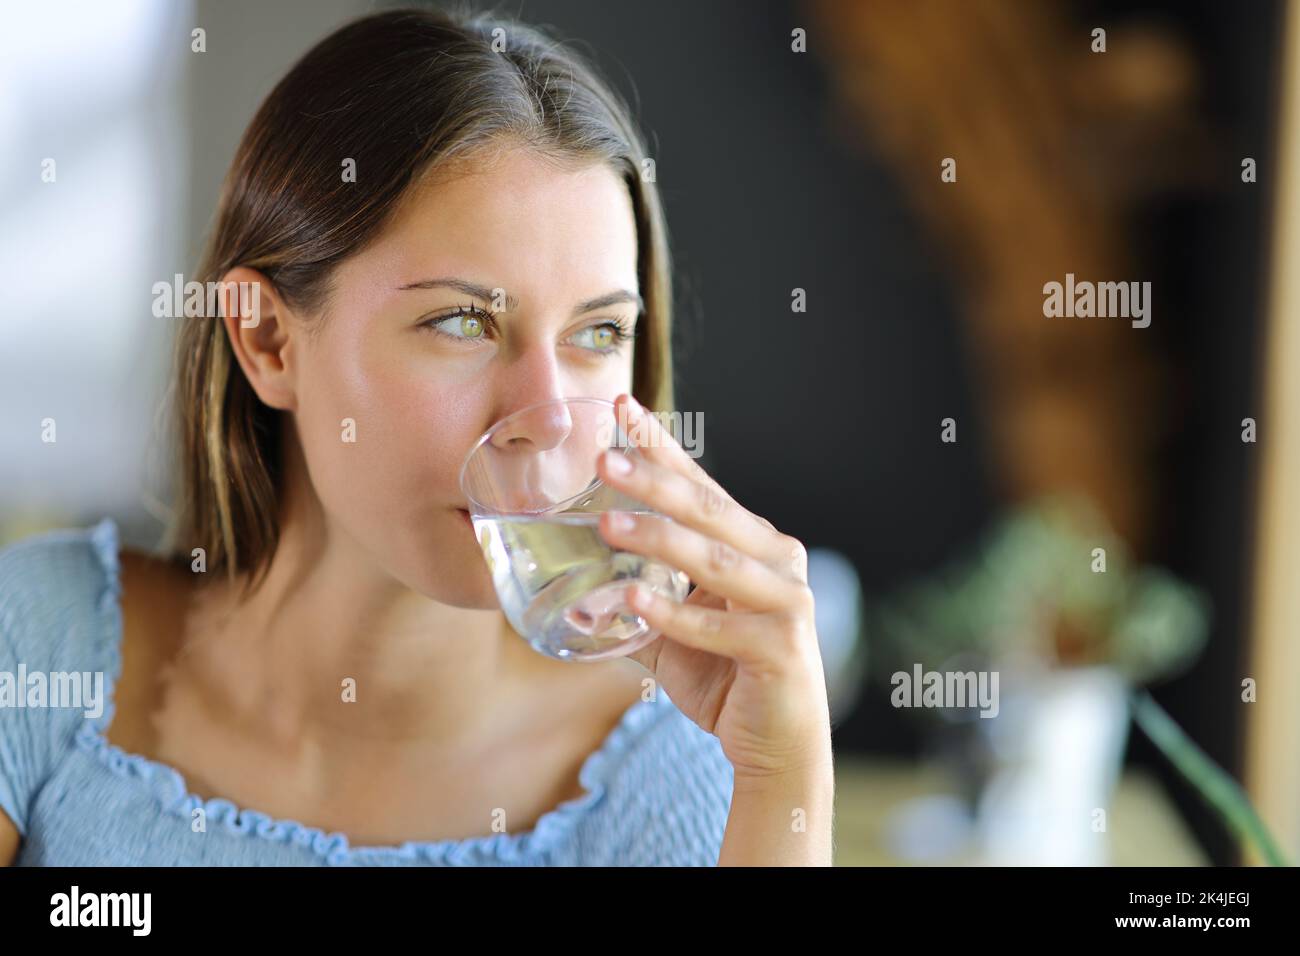 Happy woman drinking water from glass contemplating at home or restaurant Stock Photo